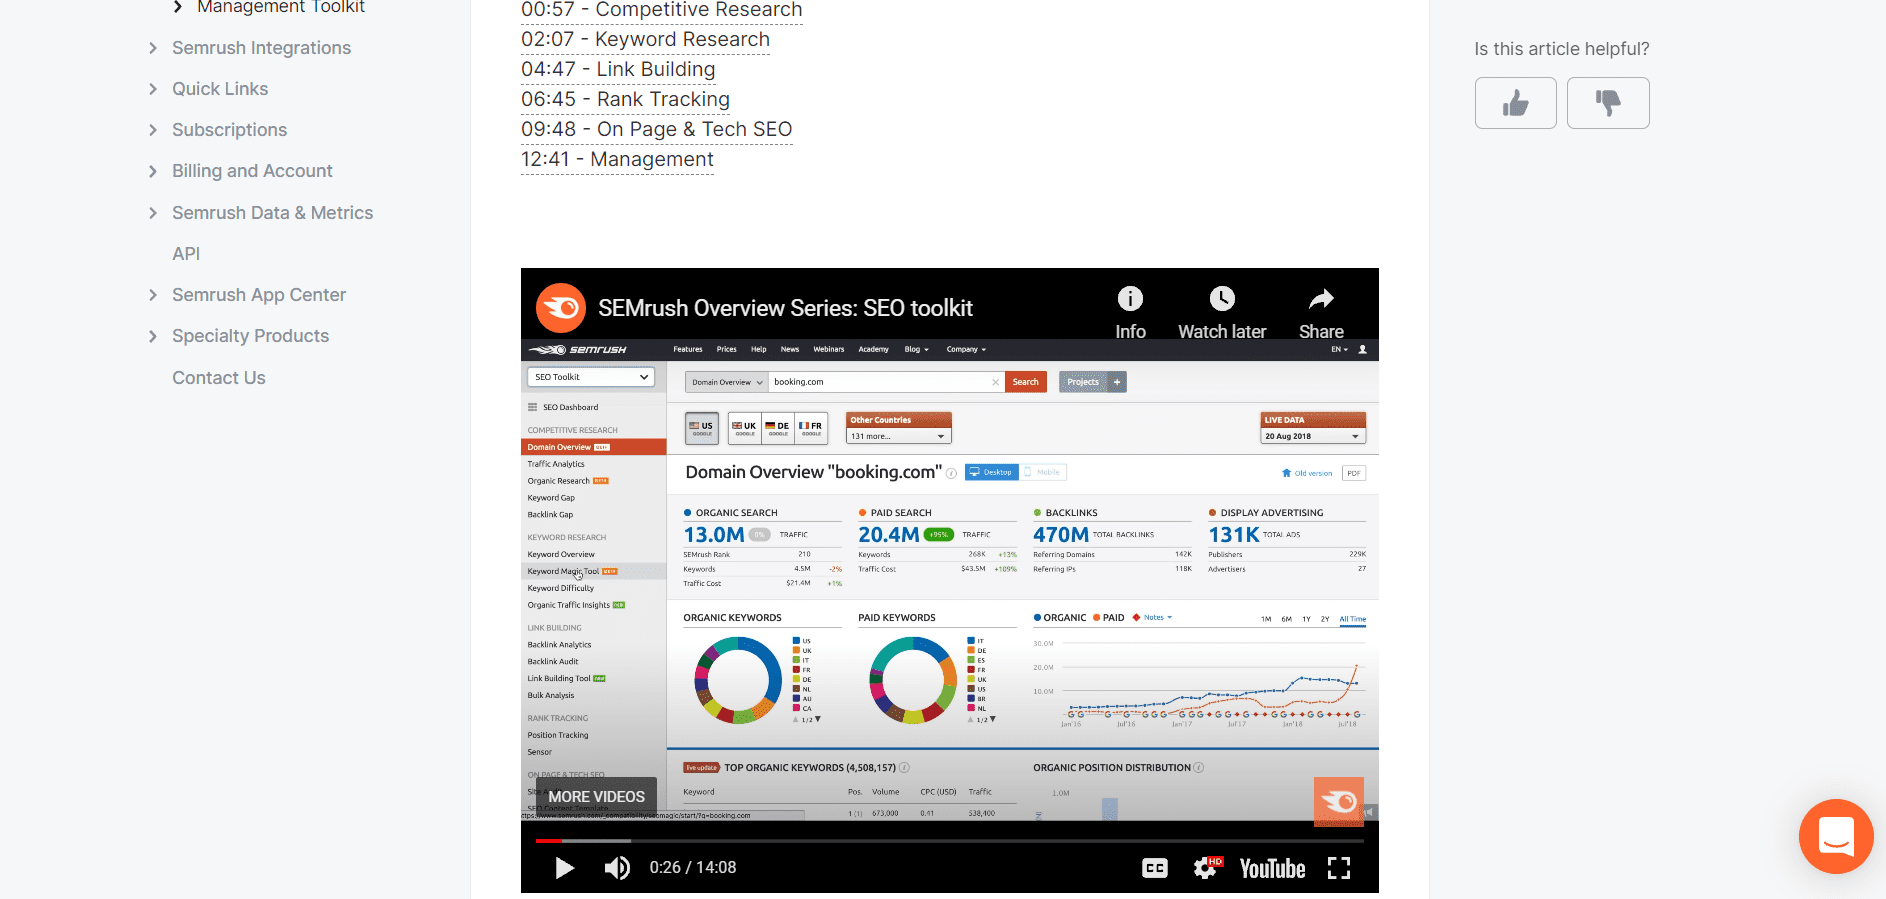 Semrush post its explanatory videos both on the website and on YouTube